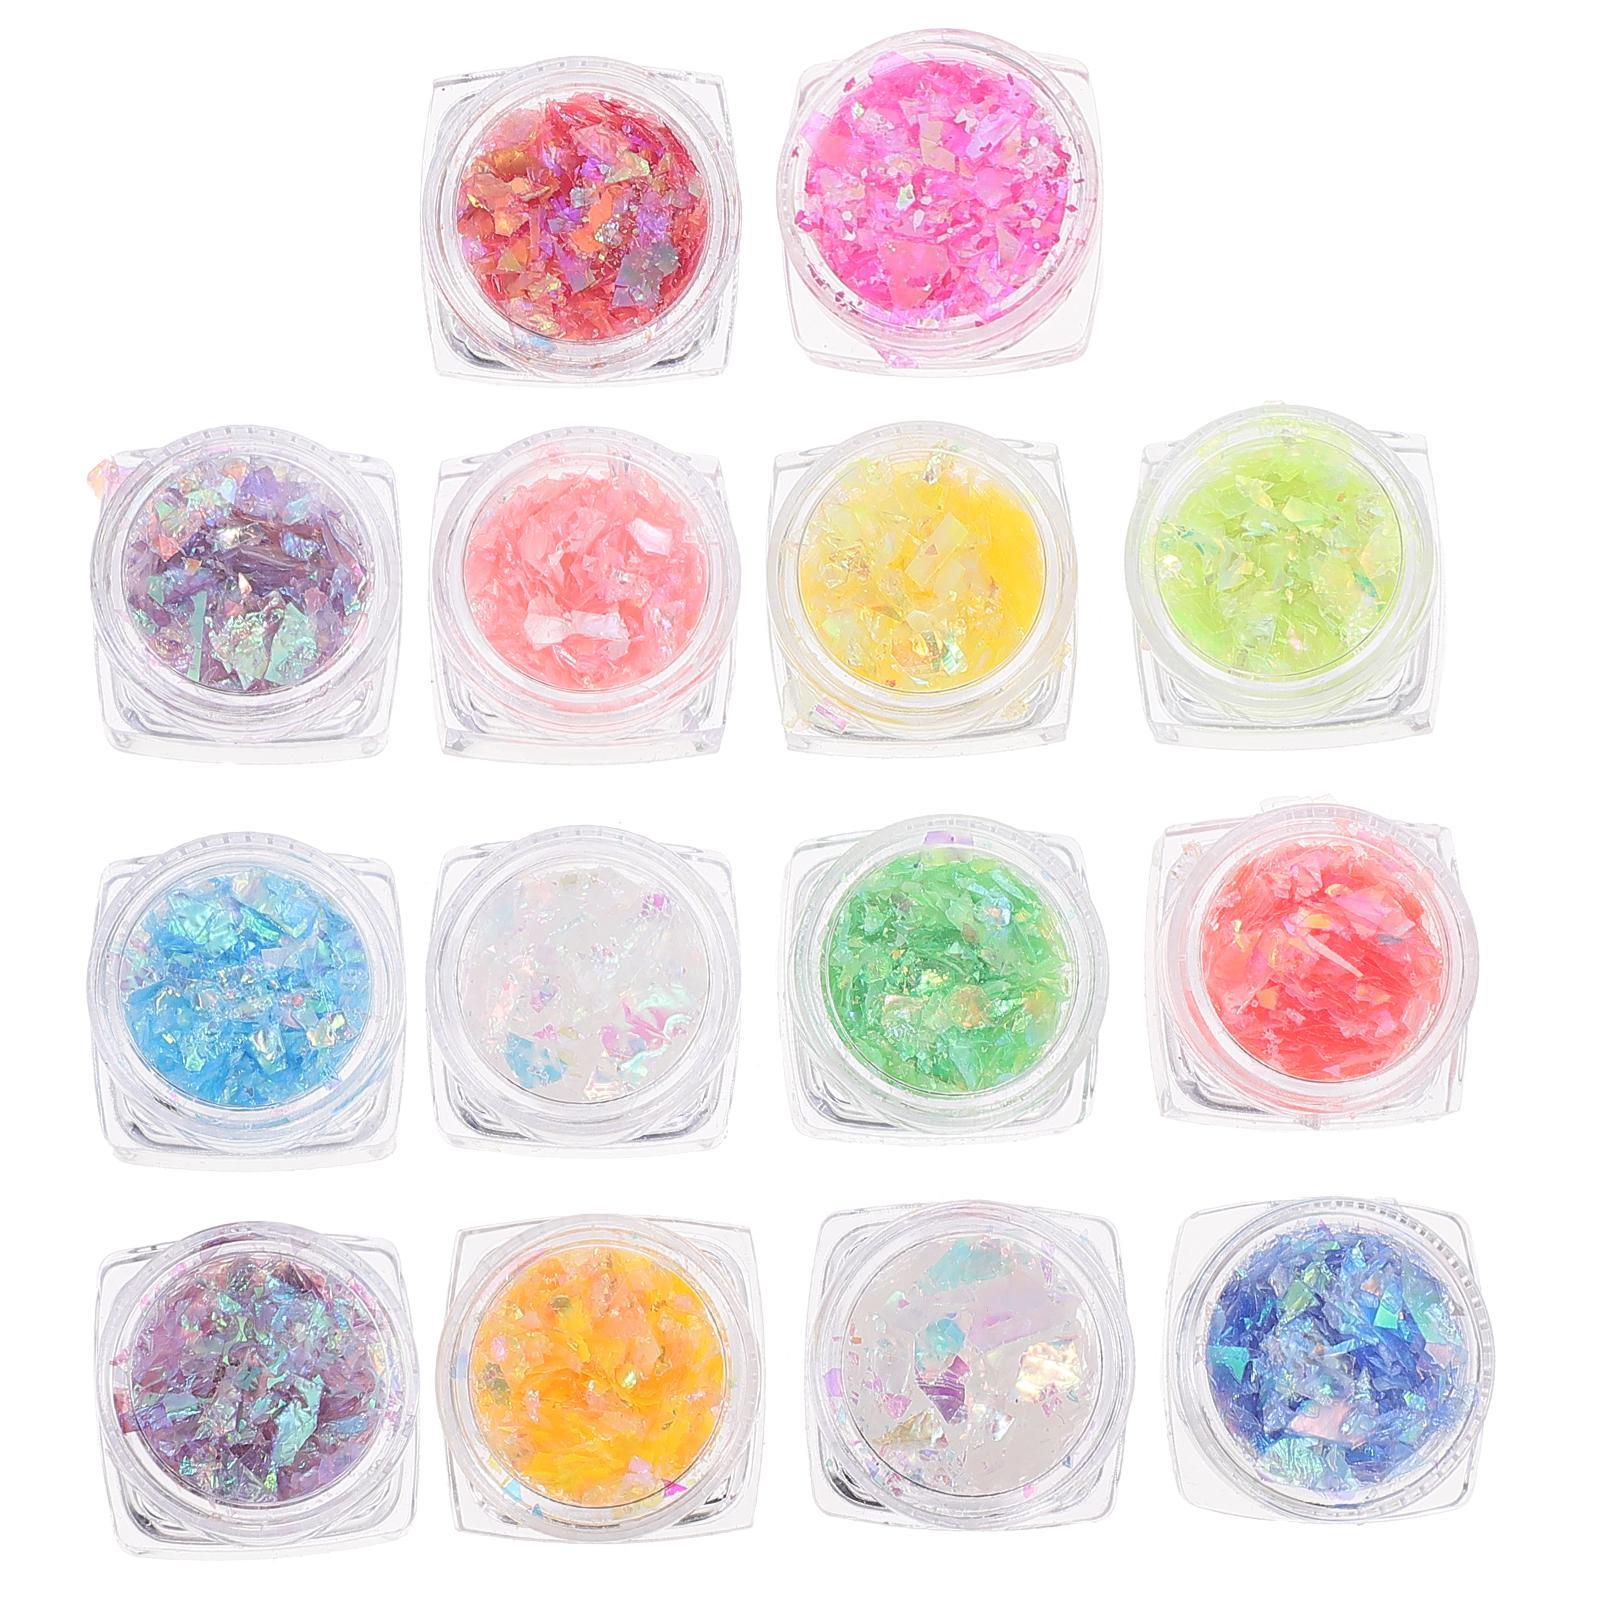 14 Boxes Nail Art Sequins Stickers Stencils Embellishments Make